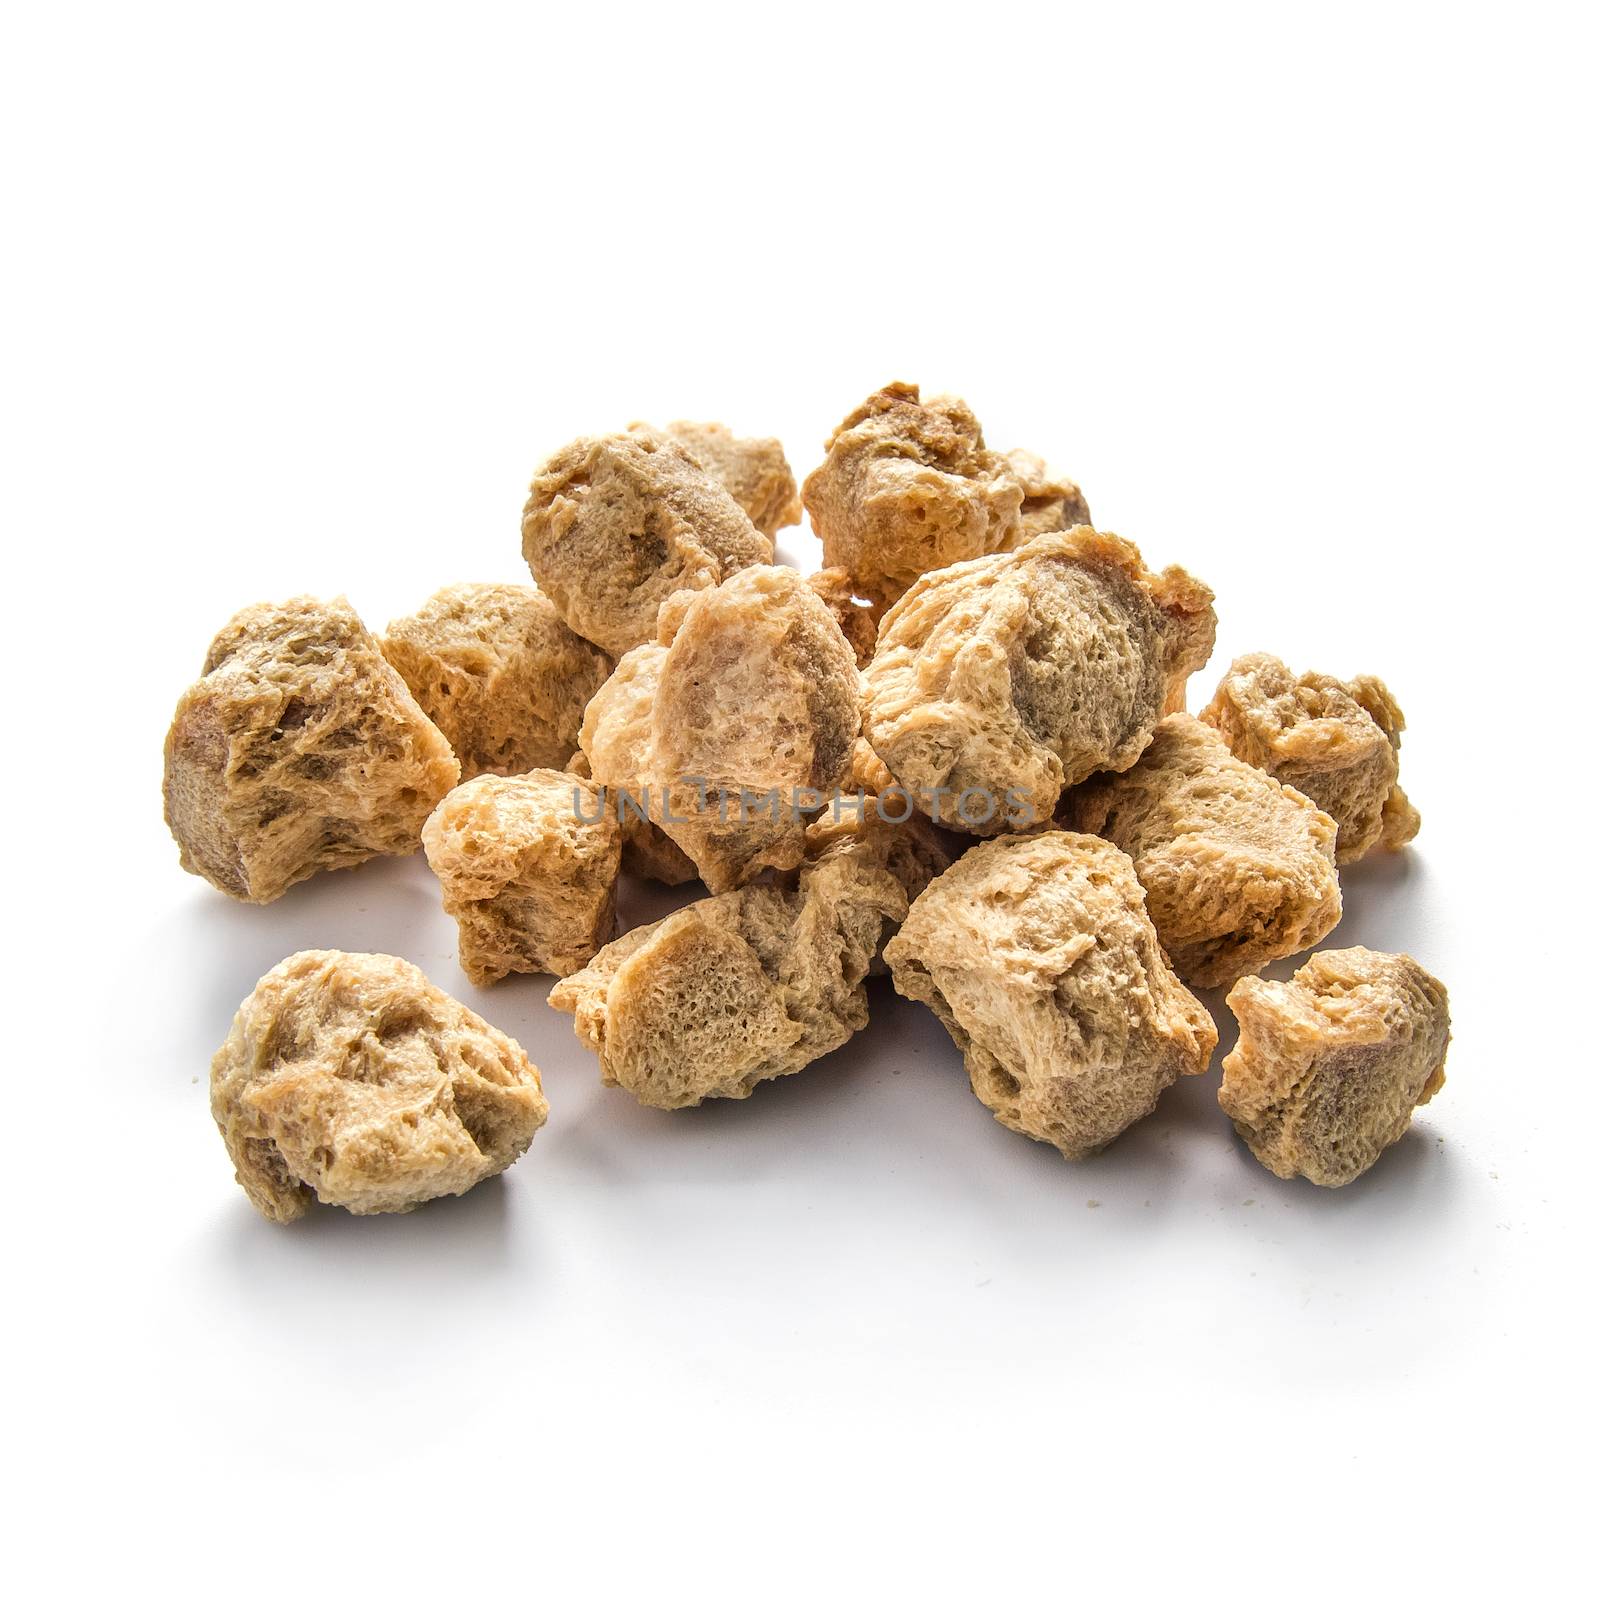 Pile of soy nuggets on white background